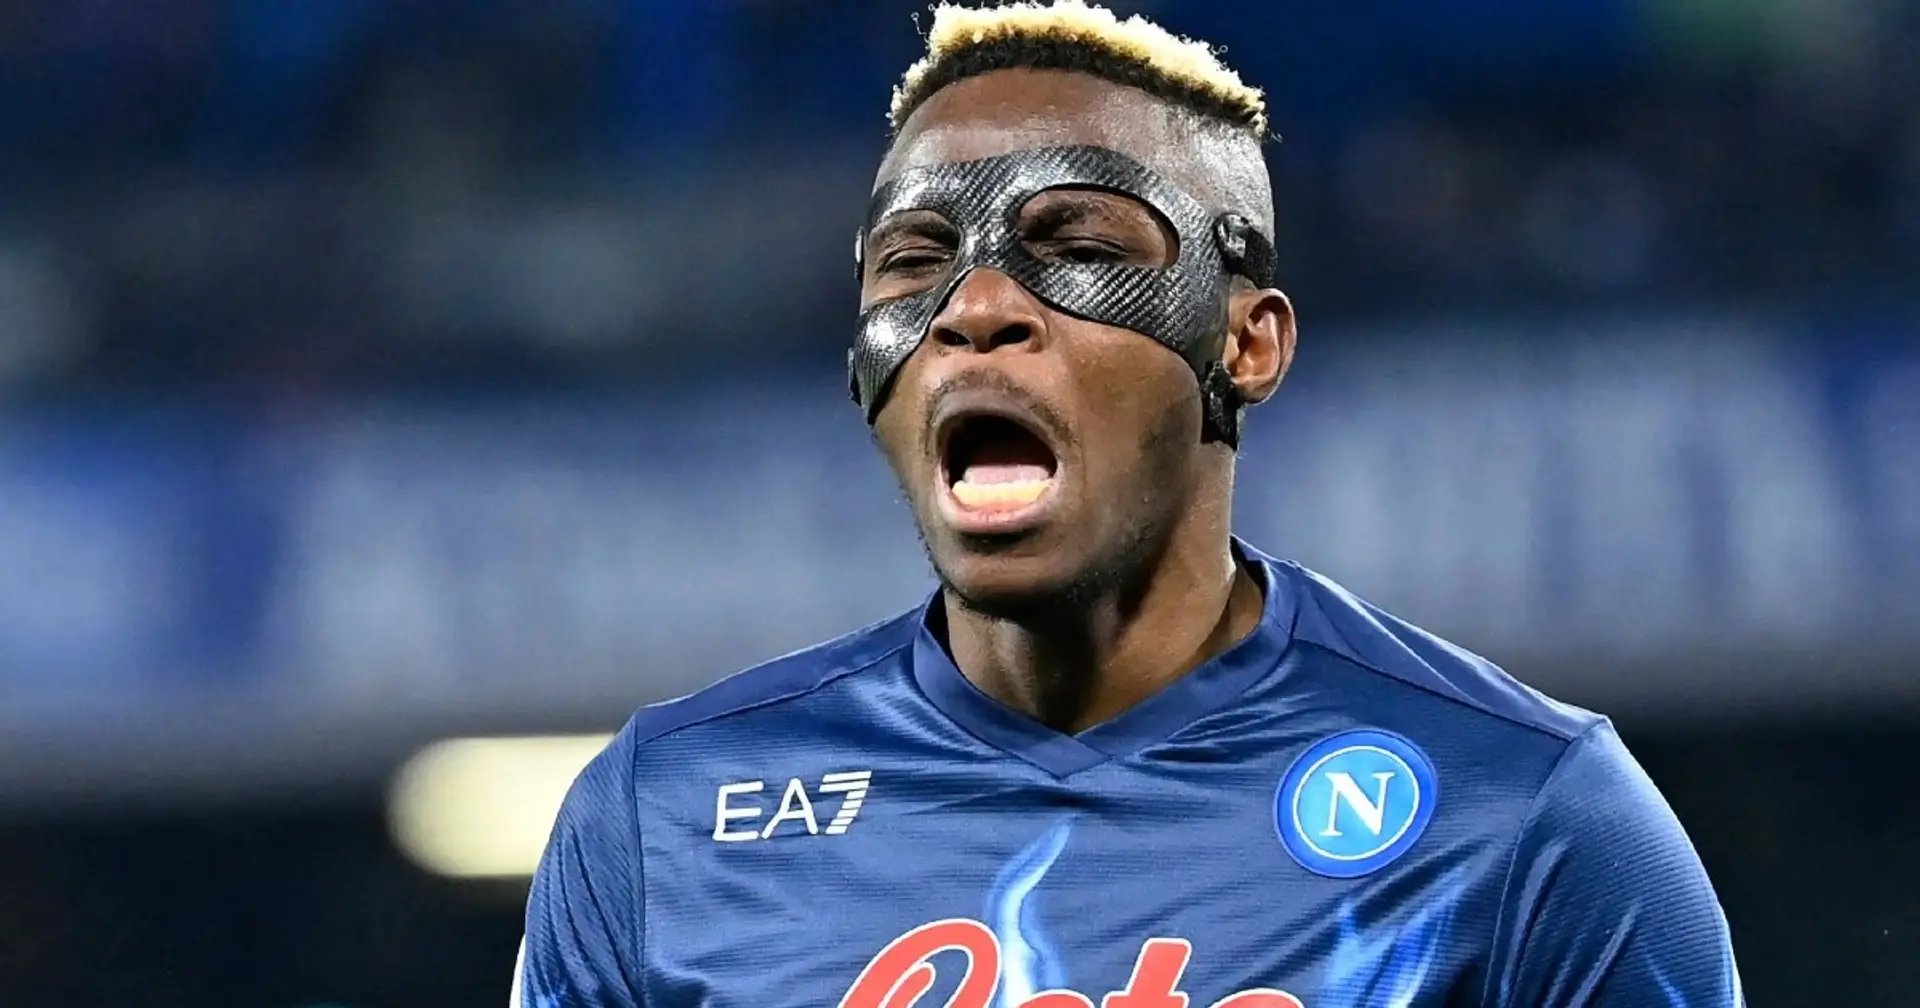 'It’s difficult to keep players when they are wanted by rich clubs': Napoli president drops Osimhen transfer hint